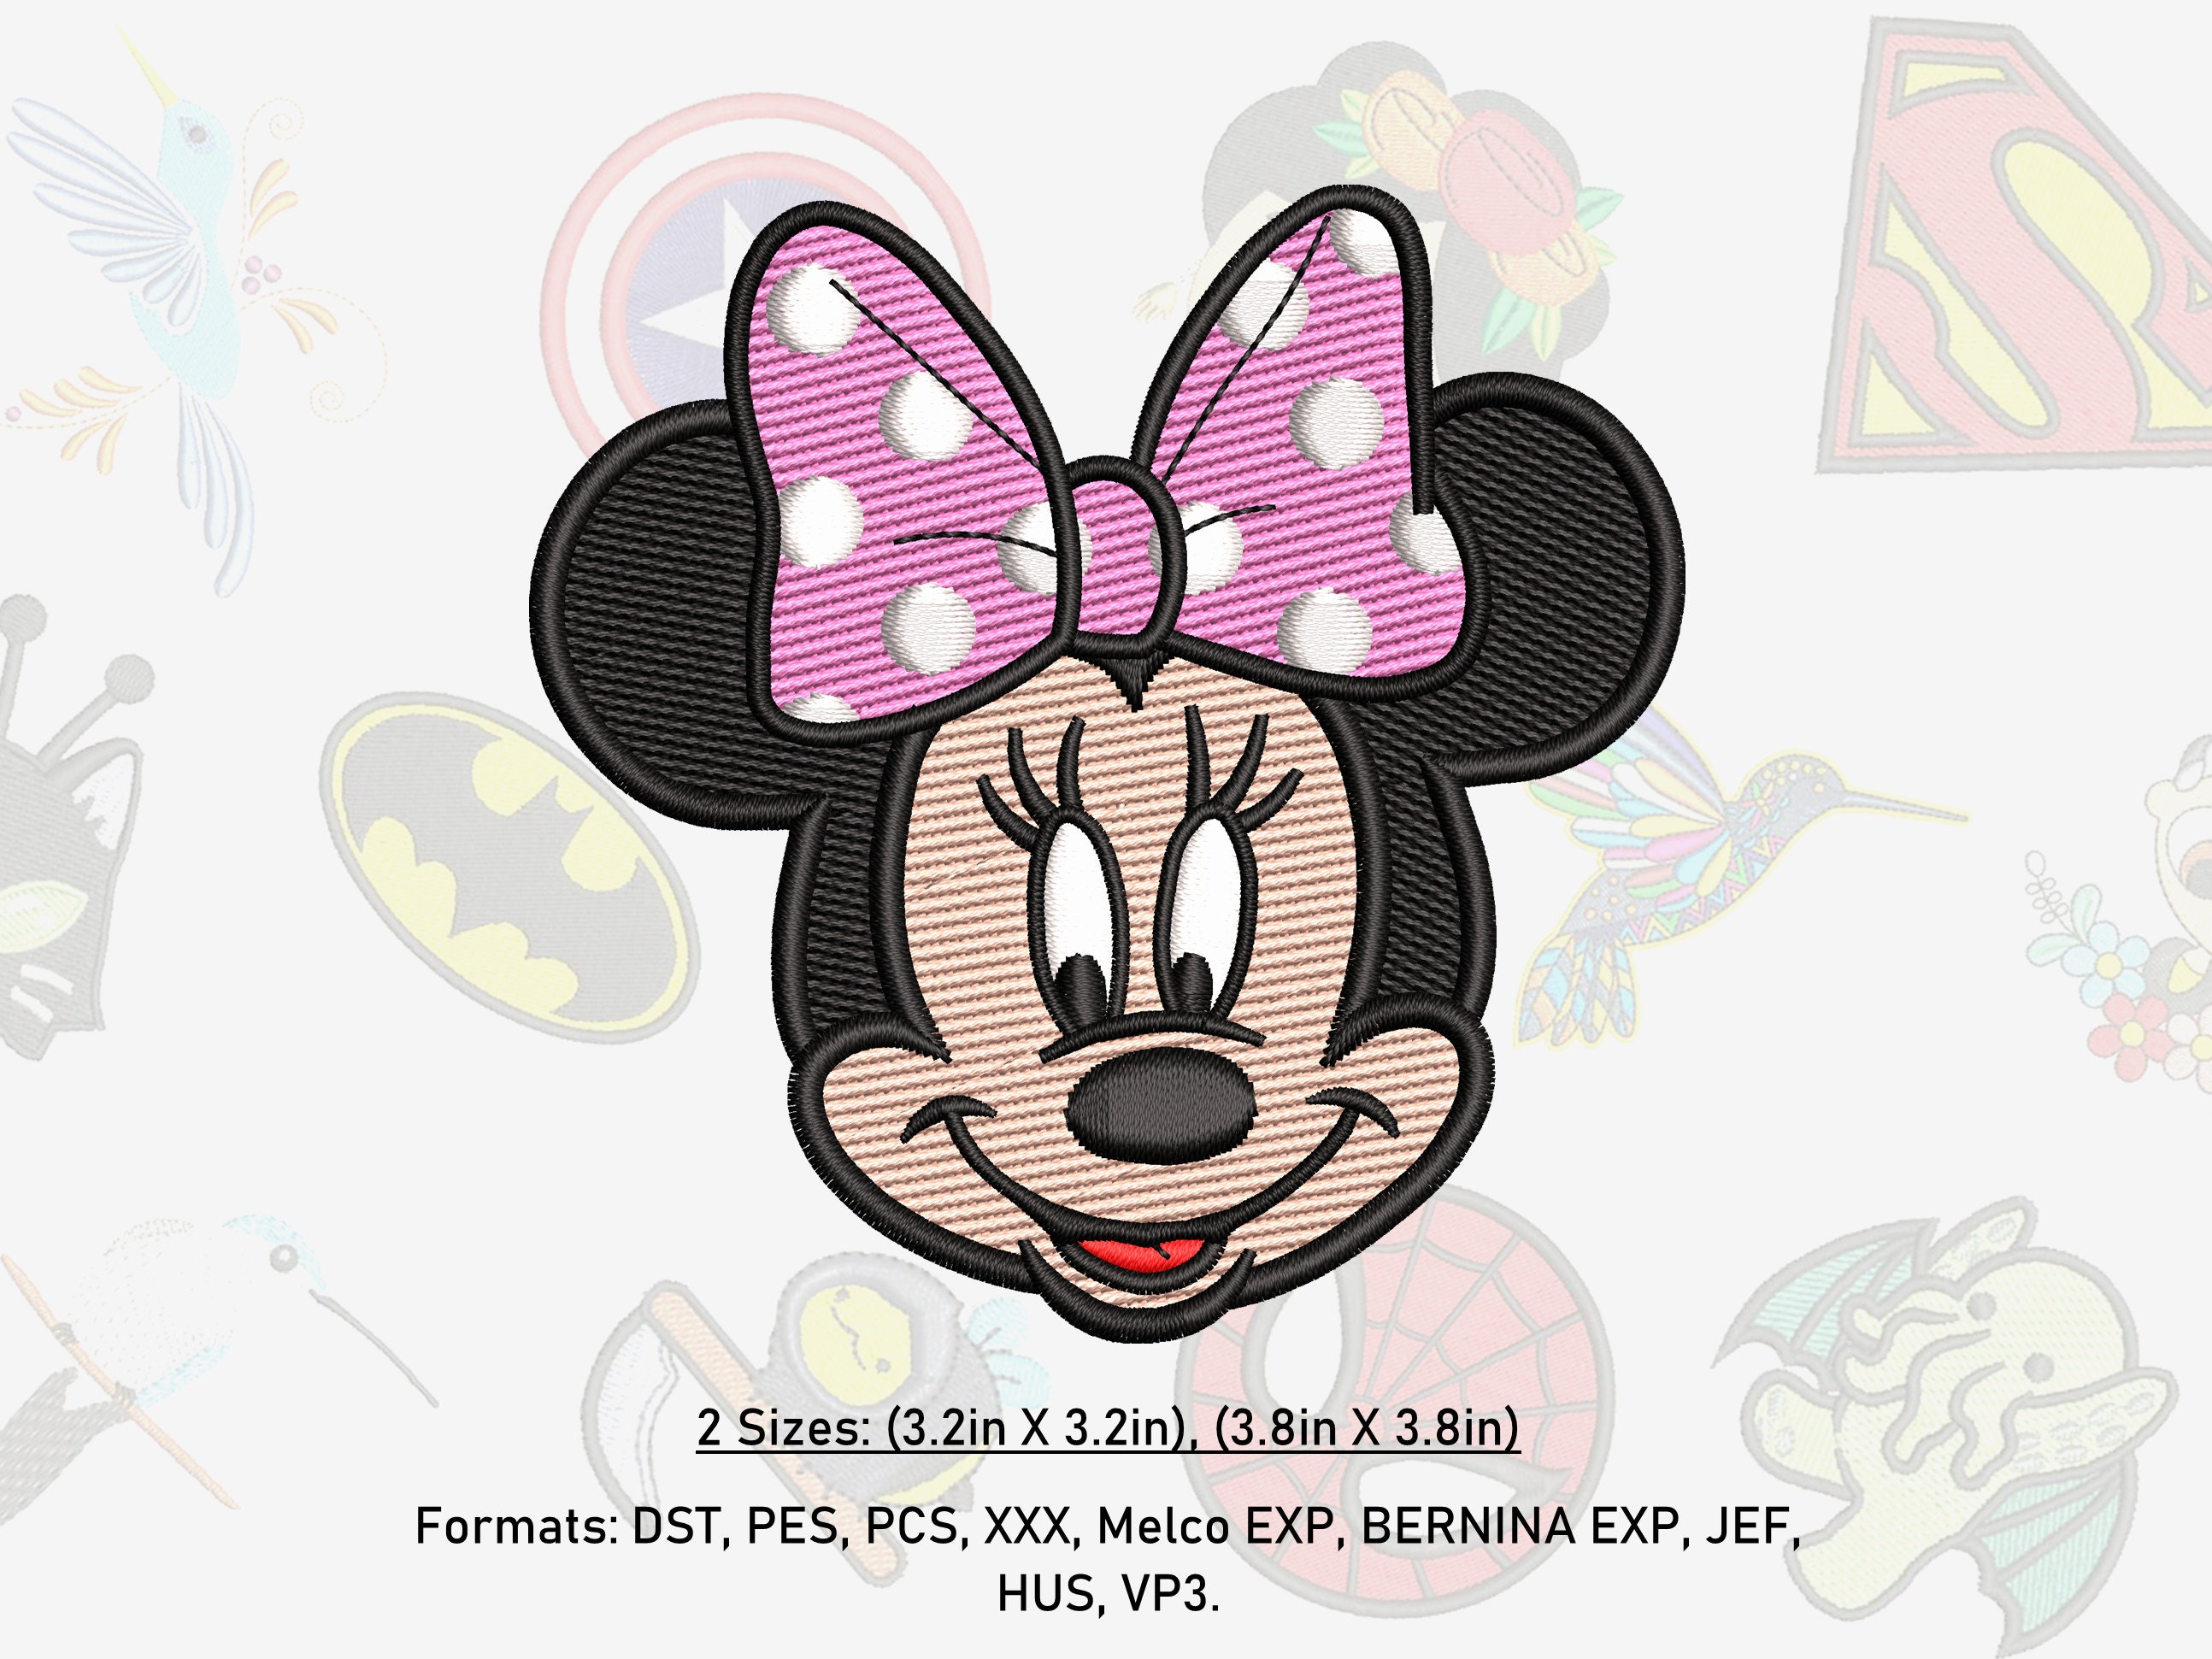 Large Sequin Minnie Mouse Patch, Minnie Bow Patch, Disney Iron on & Sew on  Patch, Embroidery Patches for Denim Jacket, Patches for Jeans 